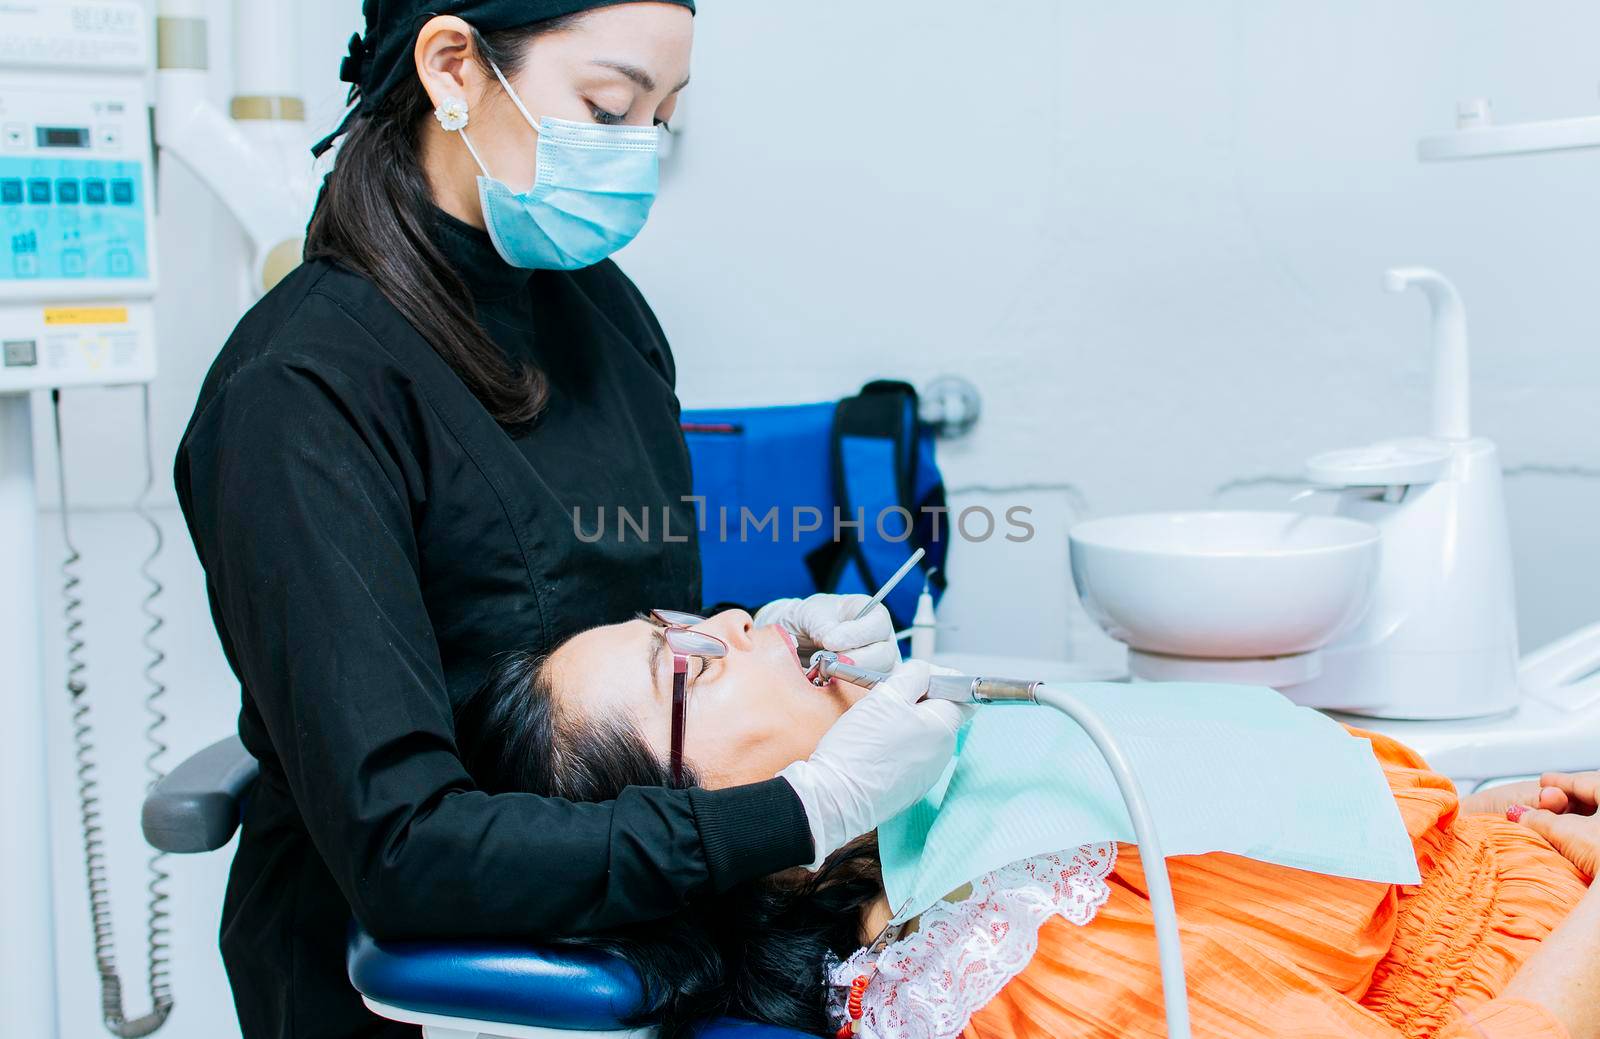 The stomatologist cleaning a patient's teeth, a dentist cleaning a patient's mouth, a dentist cleaning a patient's caries, a dentist cleaning a patient's mouth by isaiphoto